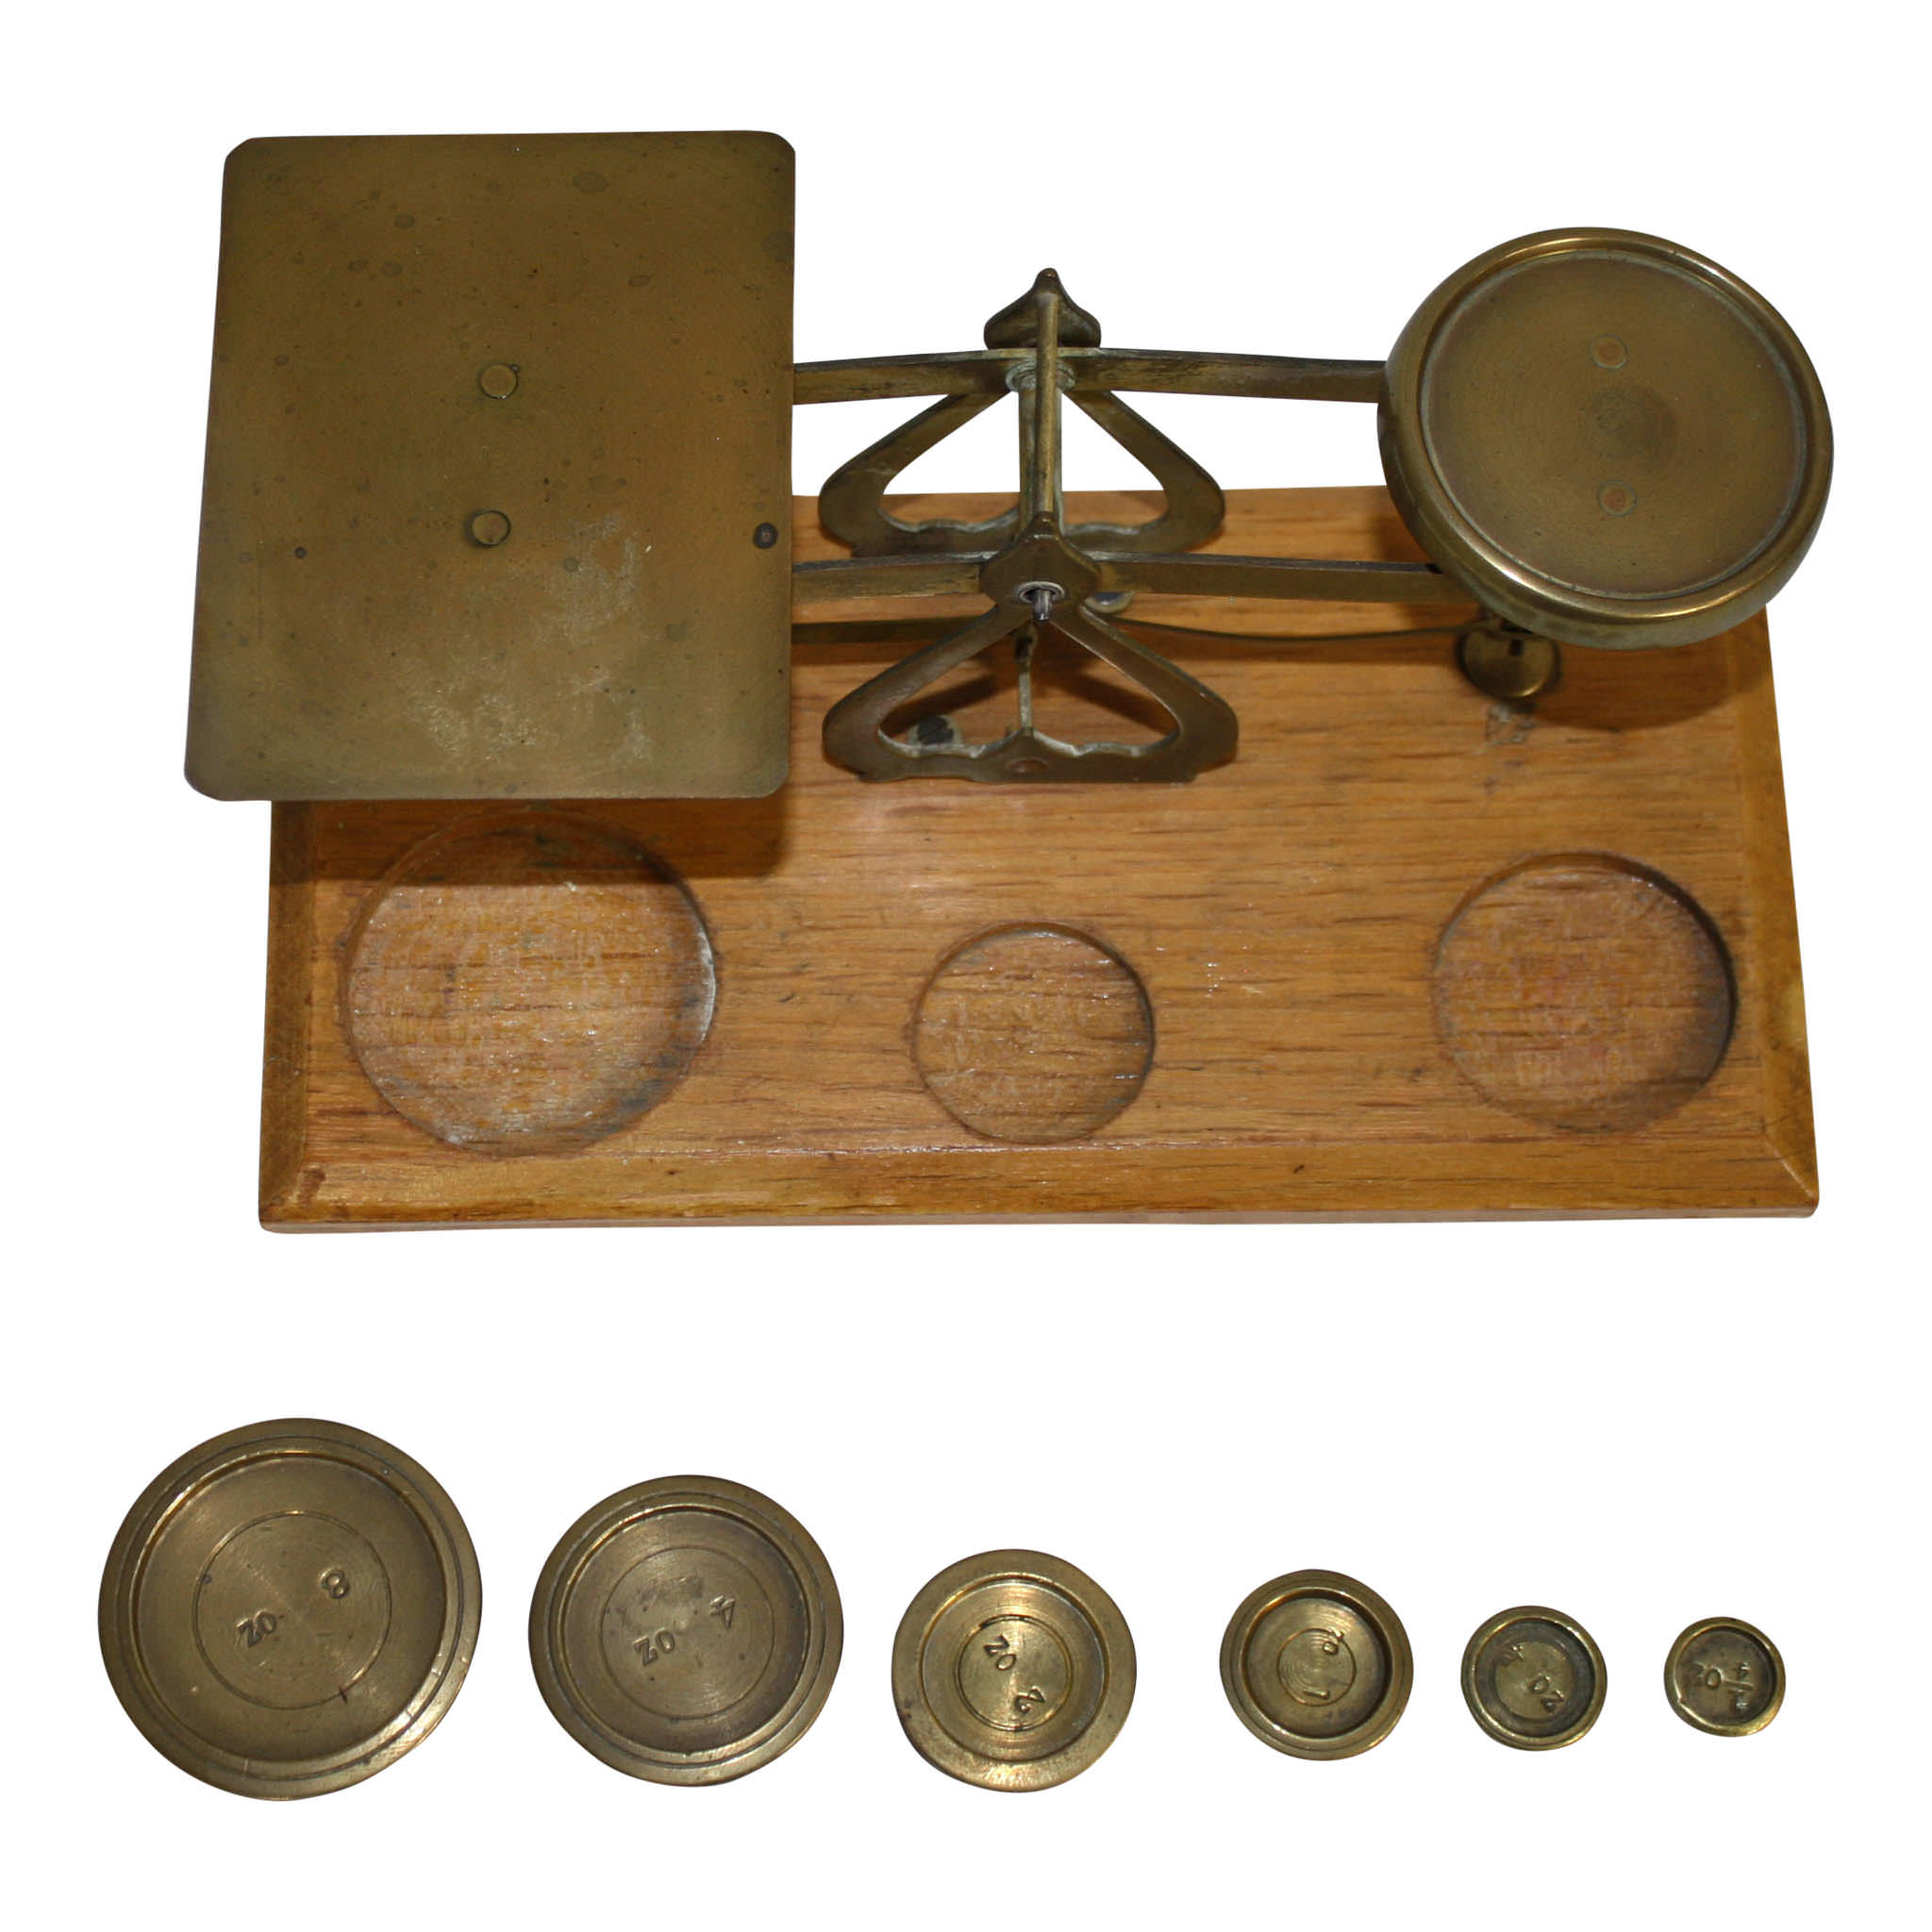 English Mail Scale and Weights